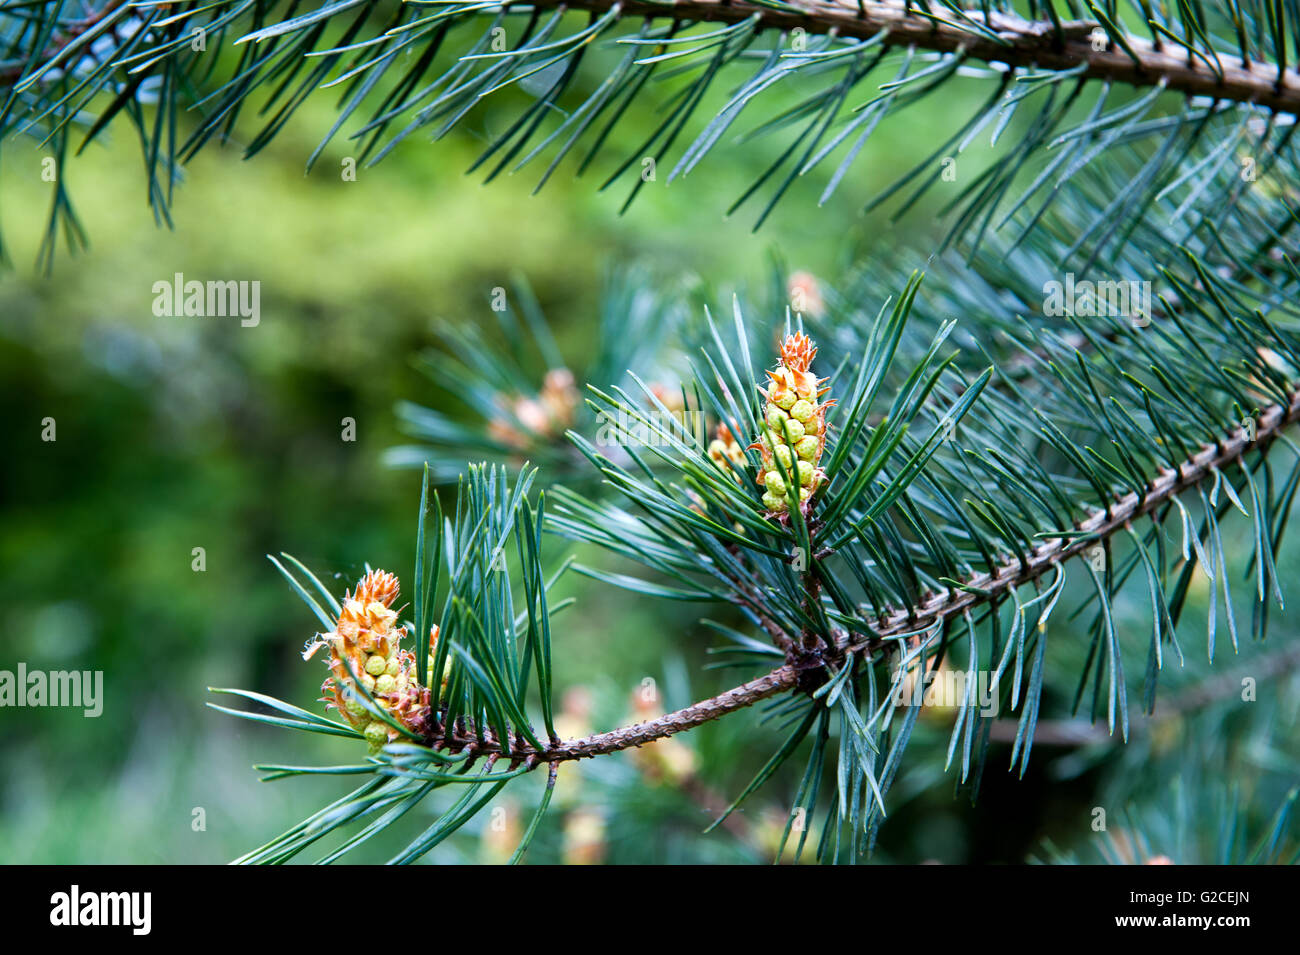 New cones on the pine tree, close-up Stock Photo